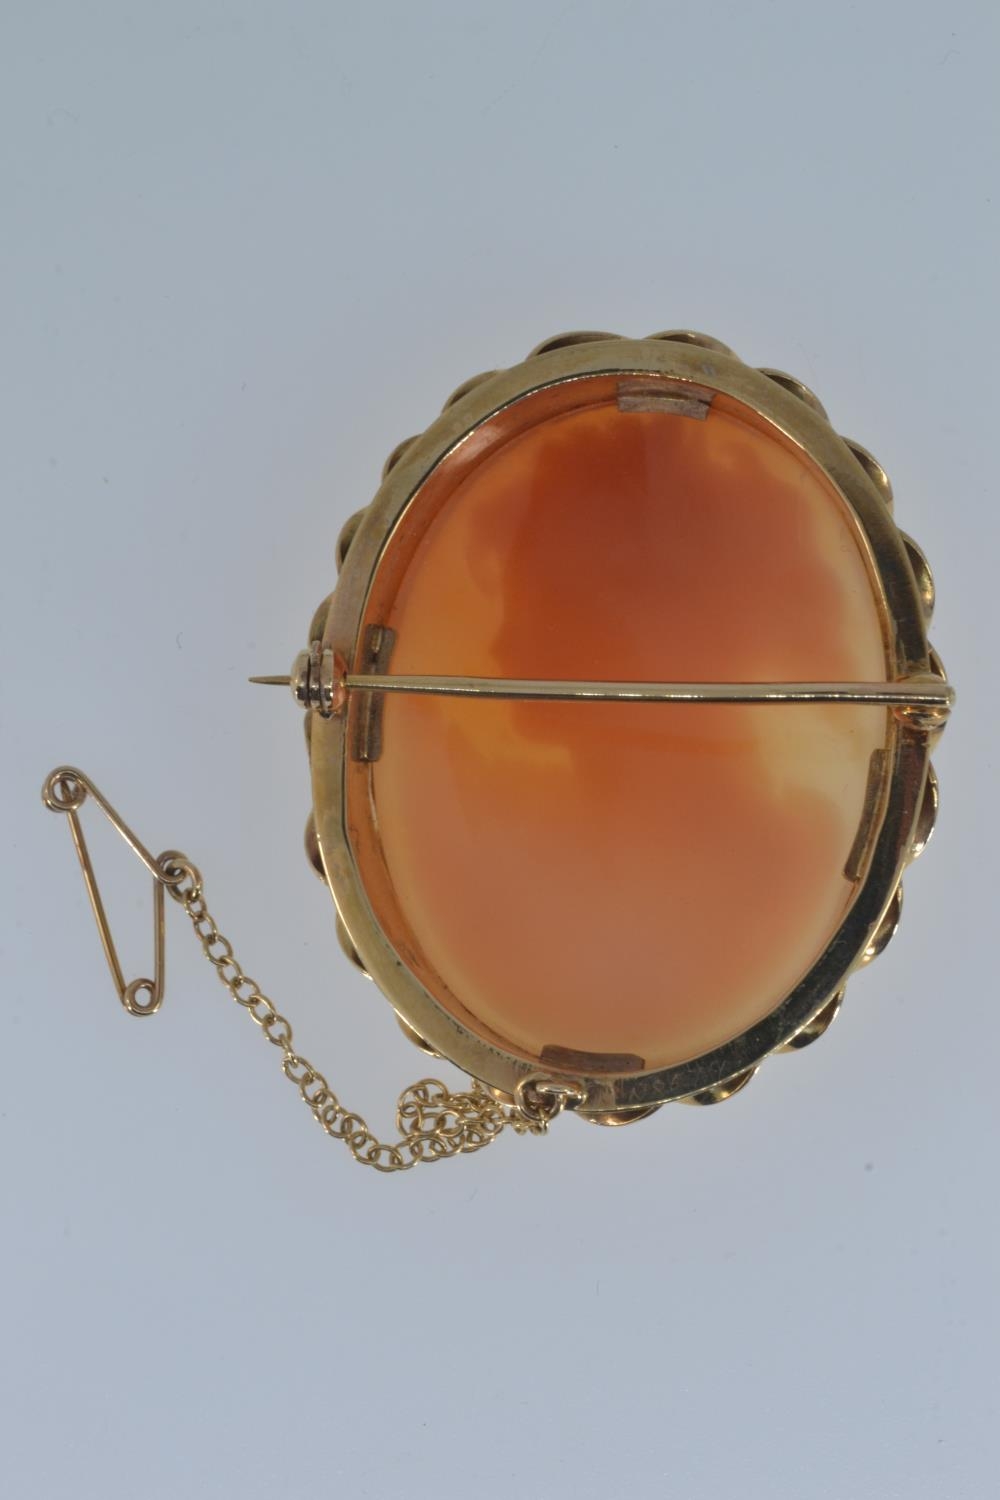 9ct gold & cameo brooch, hallmarked Birmingham, length 45mm, gross weight 14.25 grams - Image 2 of 2